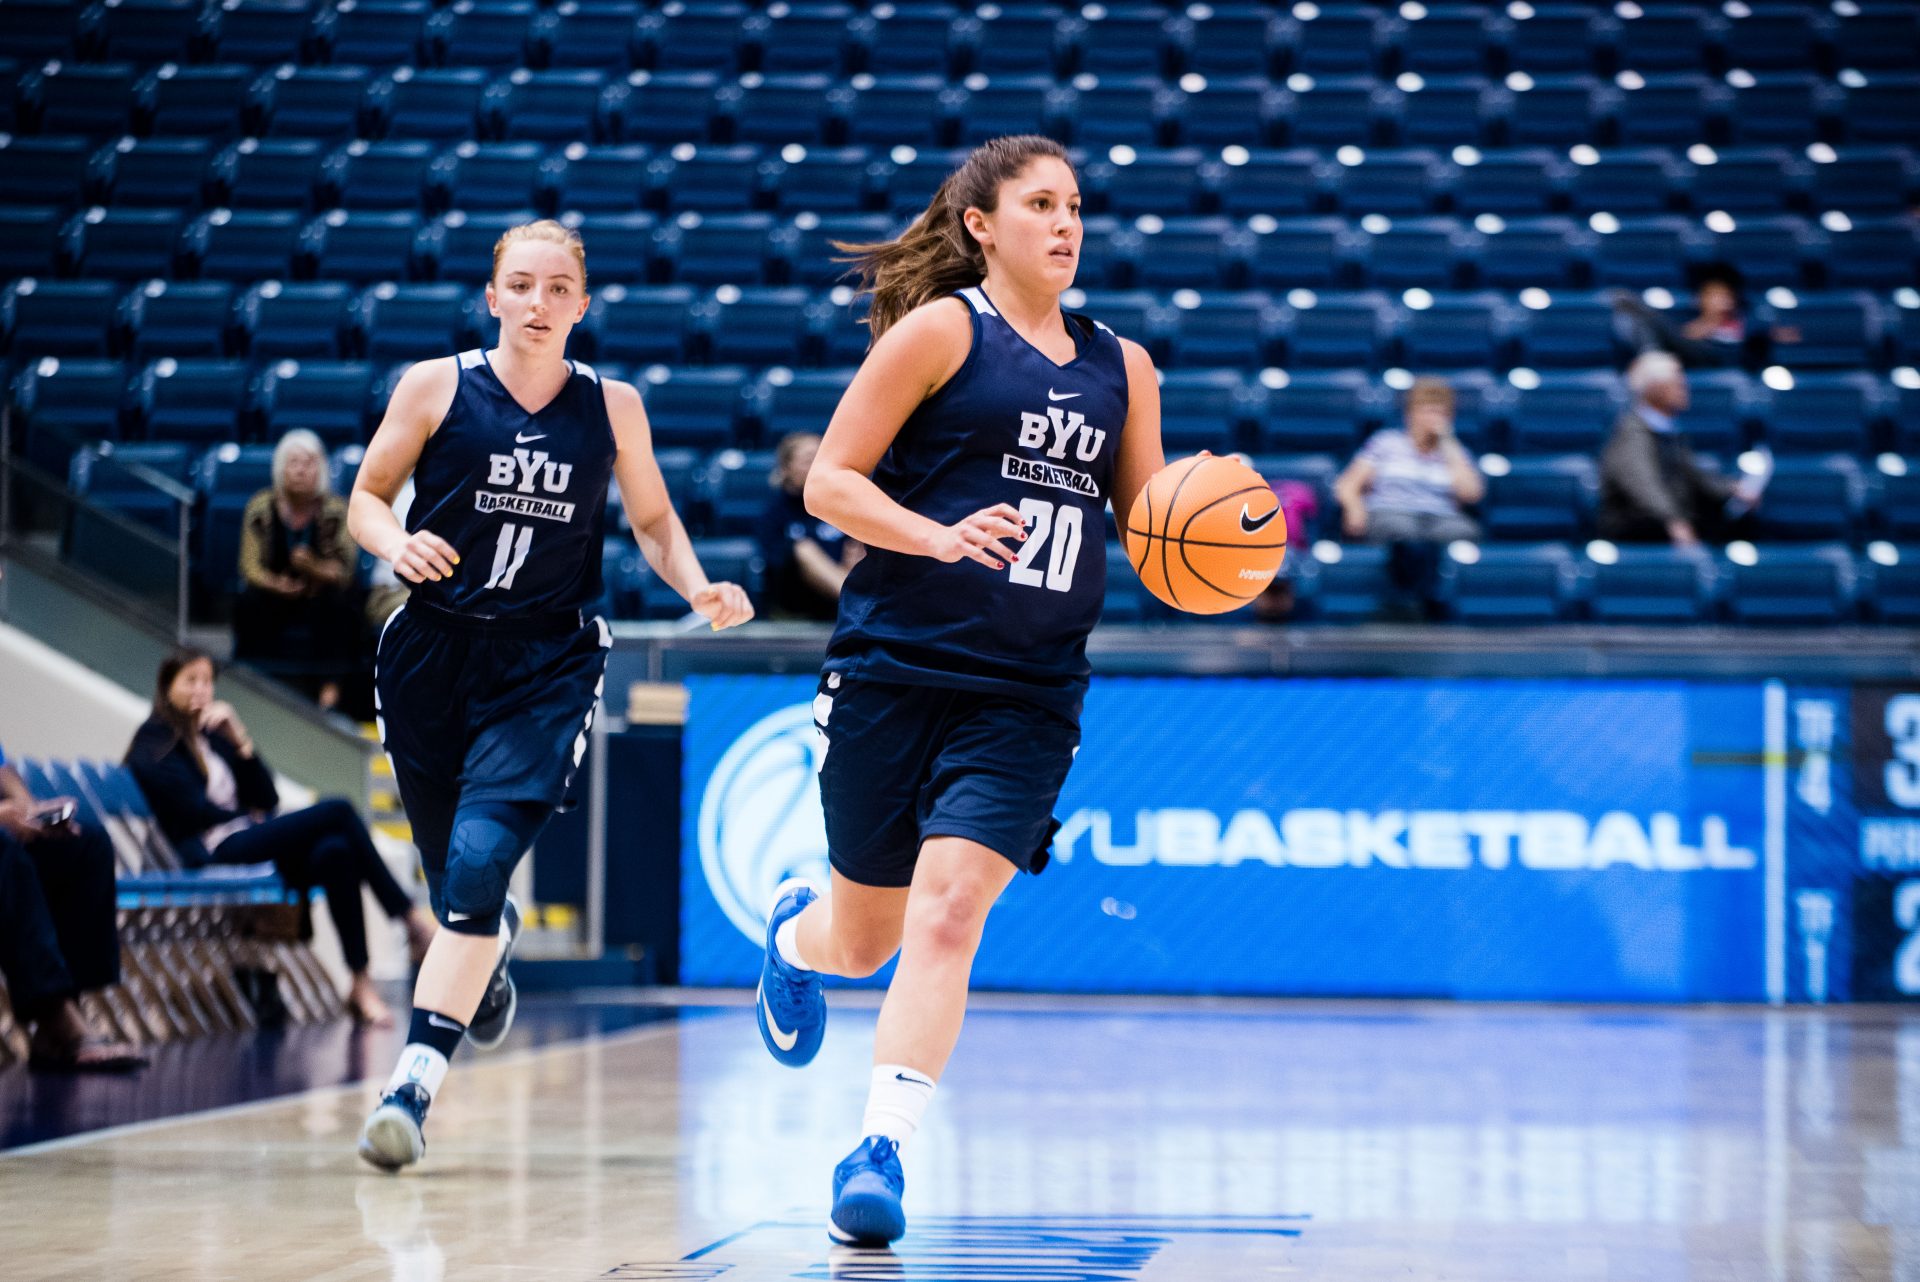 BYU women’s basketball excited for new team and season